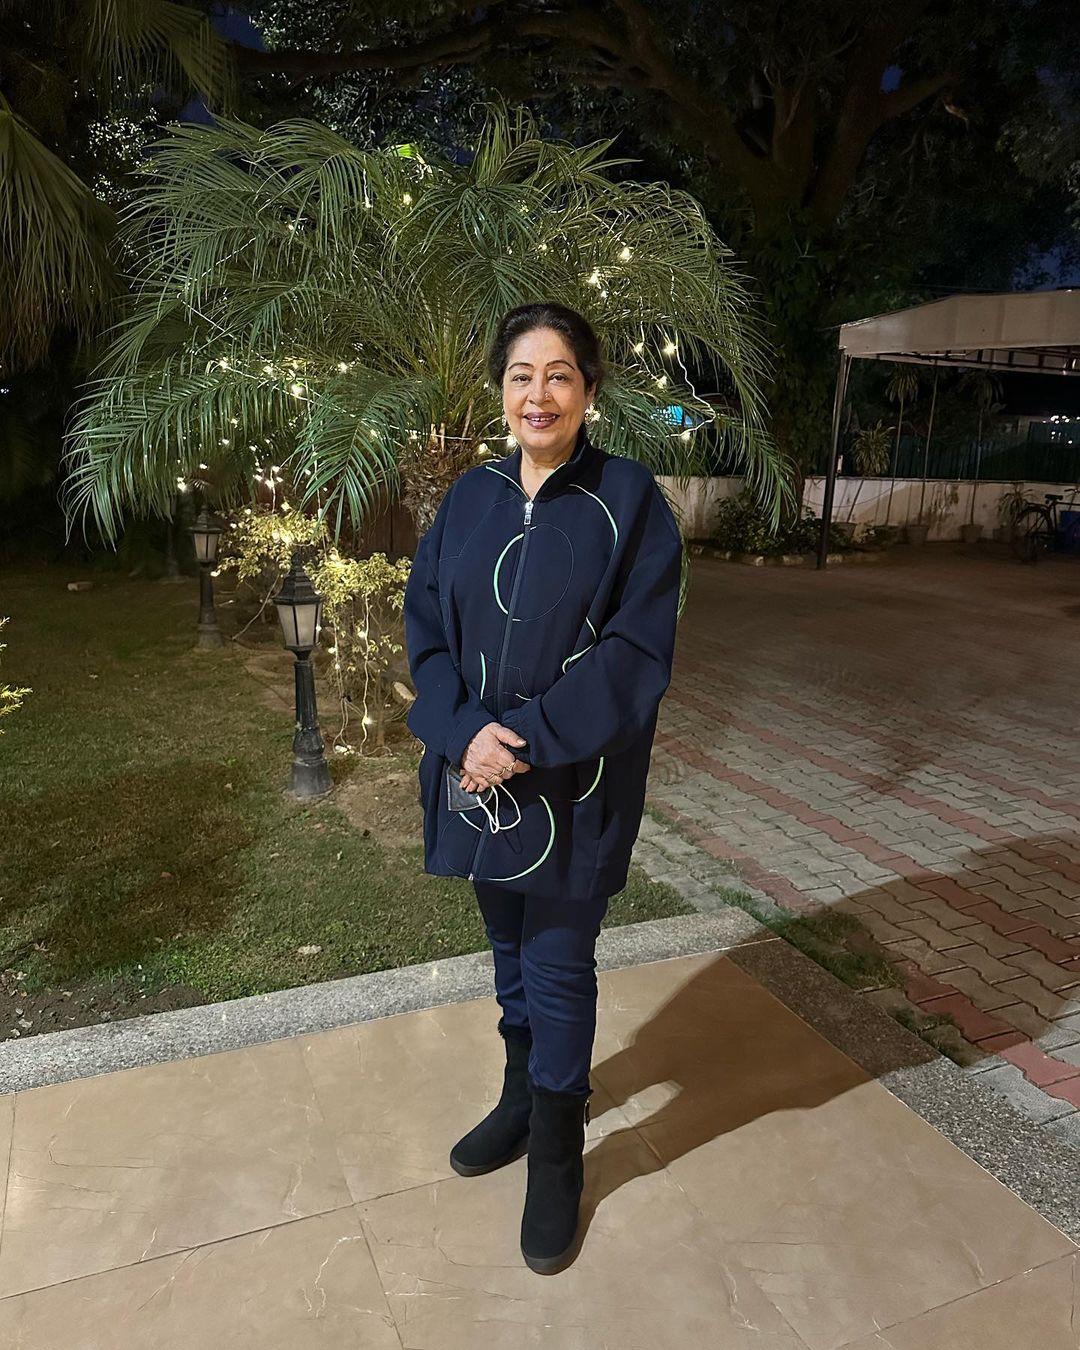  Kirron Kher, a versatile actress and politician, faced multiple myeloma (form of blood cancer). She publicly shared her diagnosis in 2021 and has been undergoing treatment with the support of her family and well-wishers